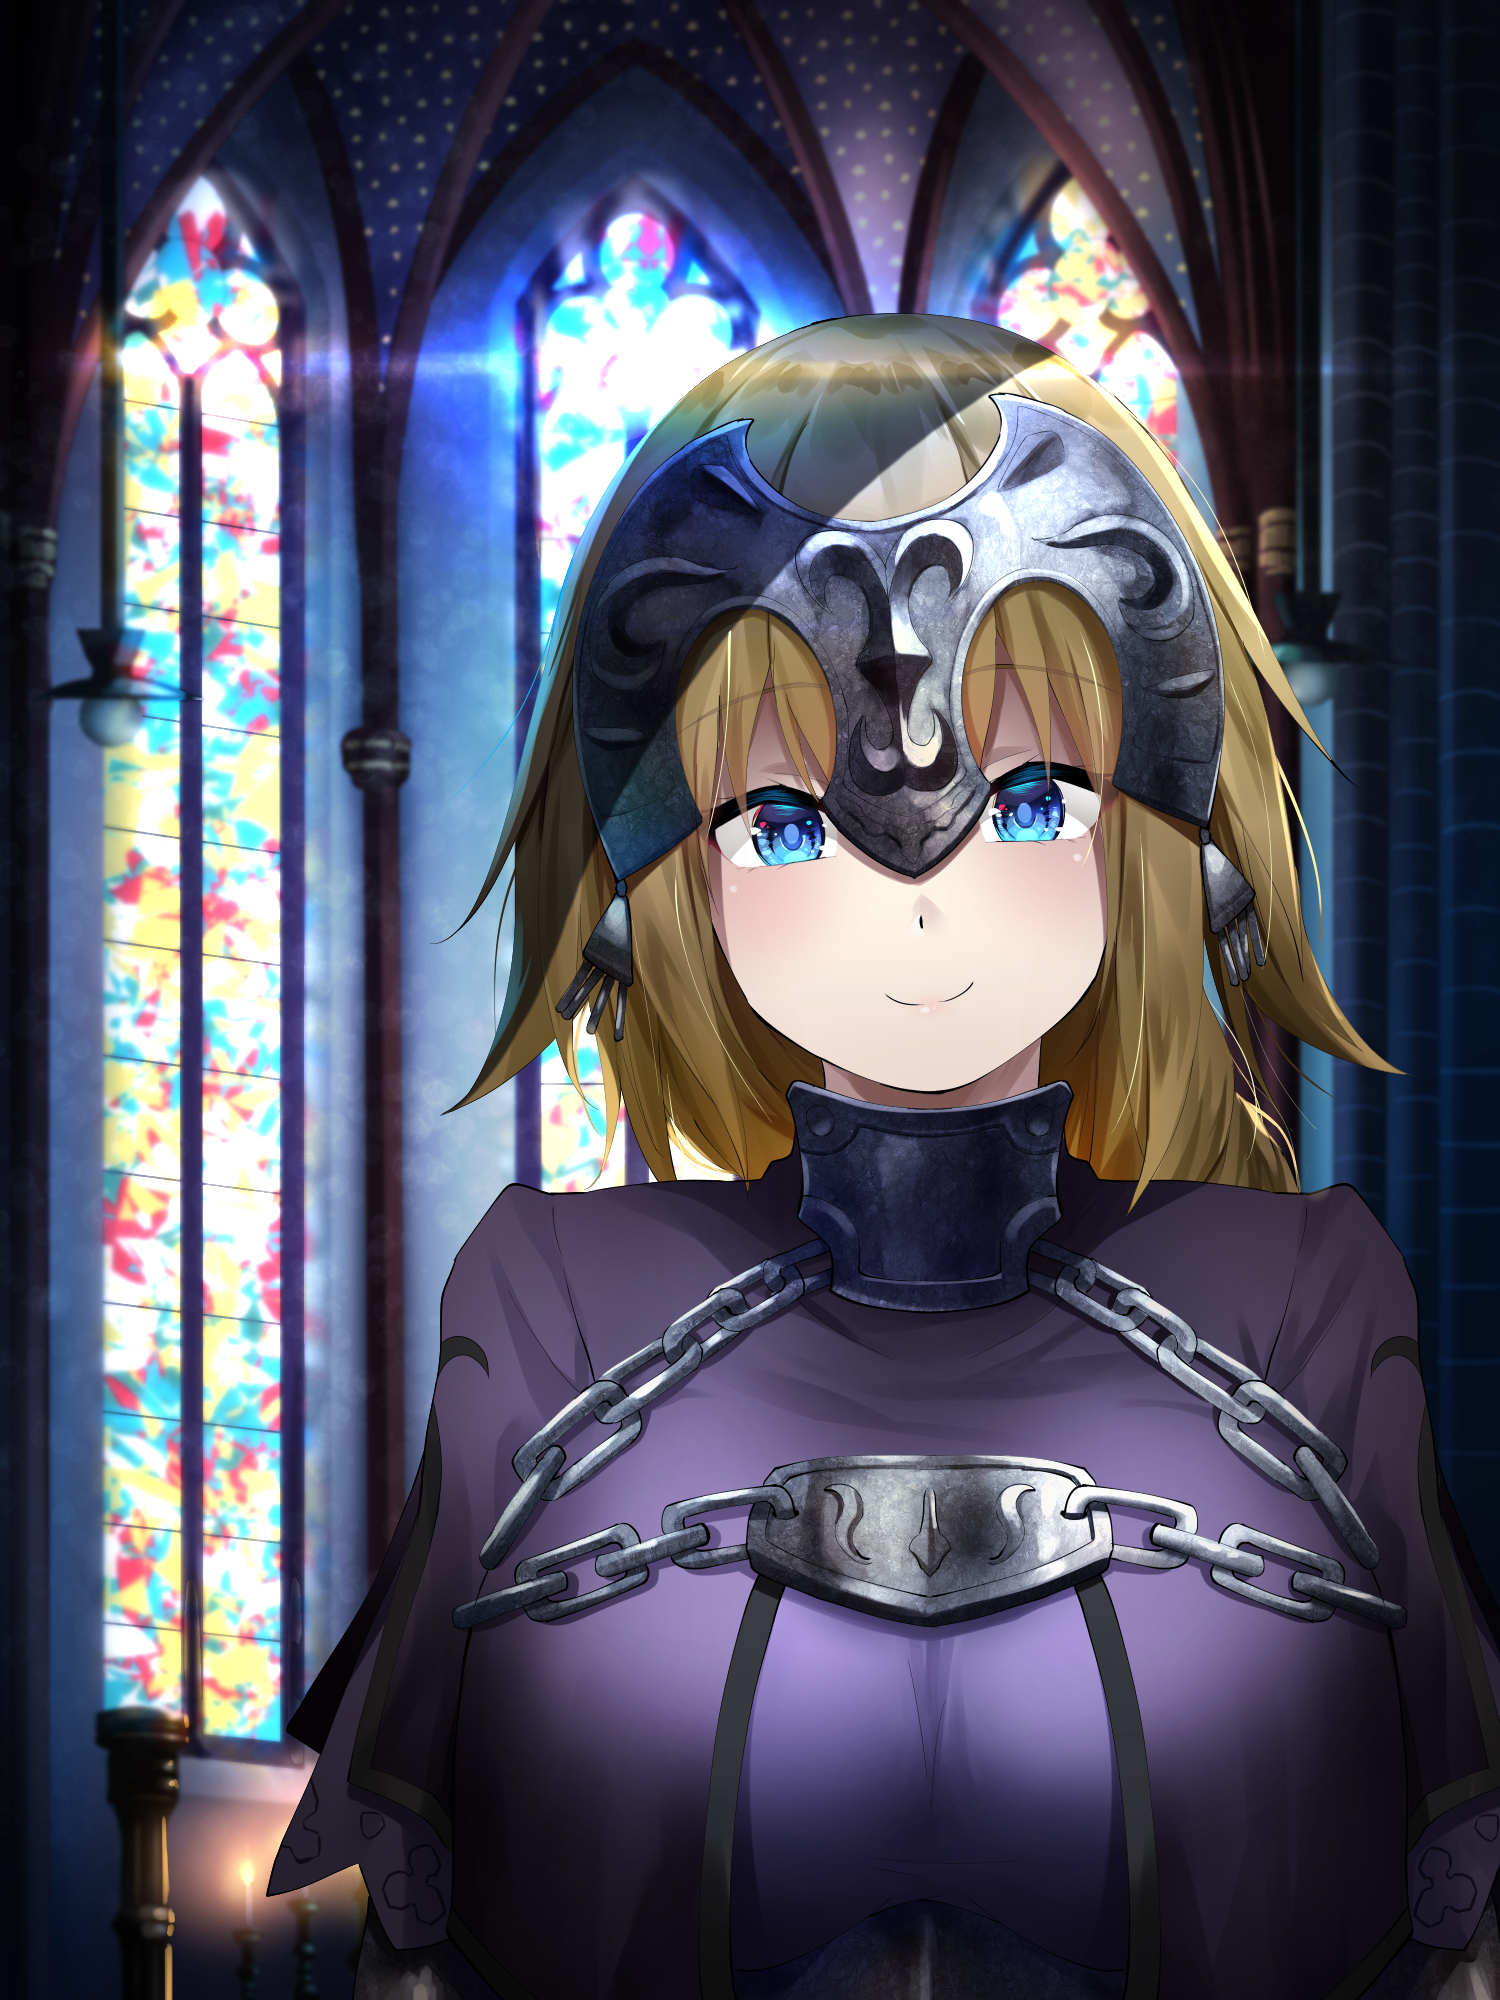 Fate Series FGO Fate Apocrypha Armored Woman Chains Violet Dress Smiling Blue Eyes Blushing Looking  1500x2000